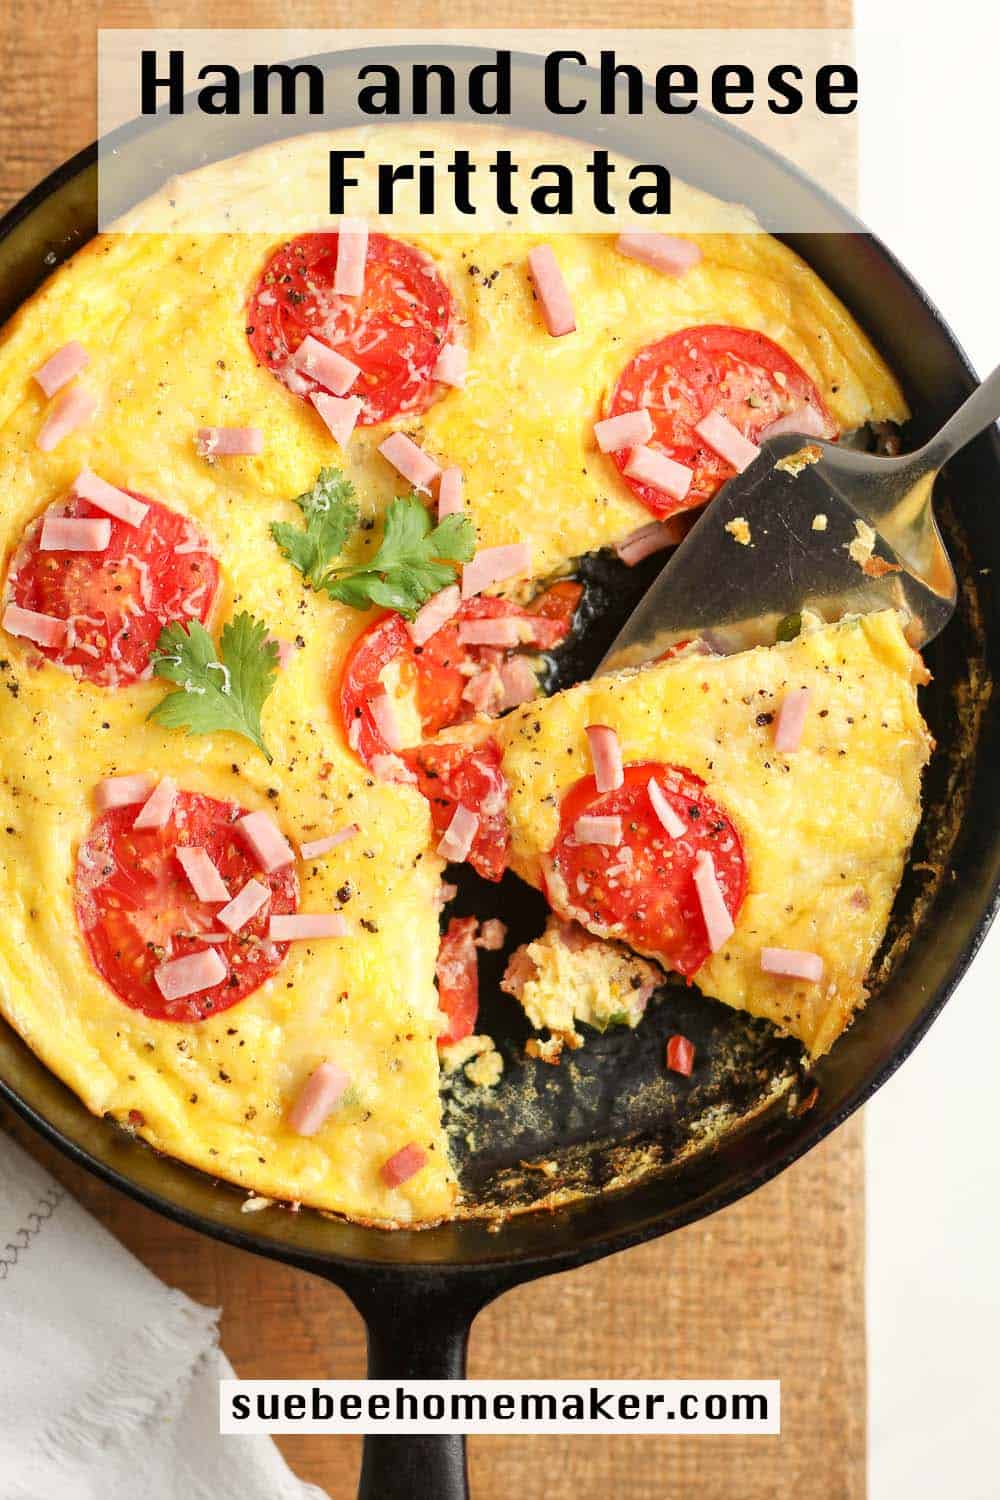 A partial baked ham and cheese frittata with tomato slices on top.